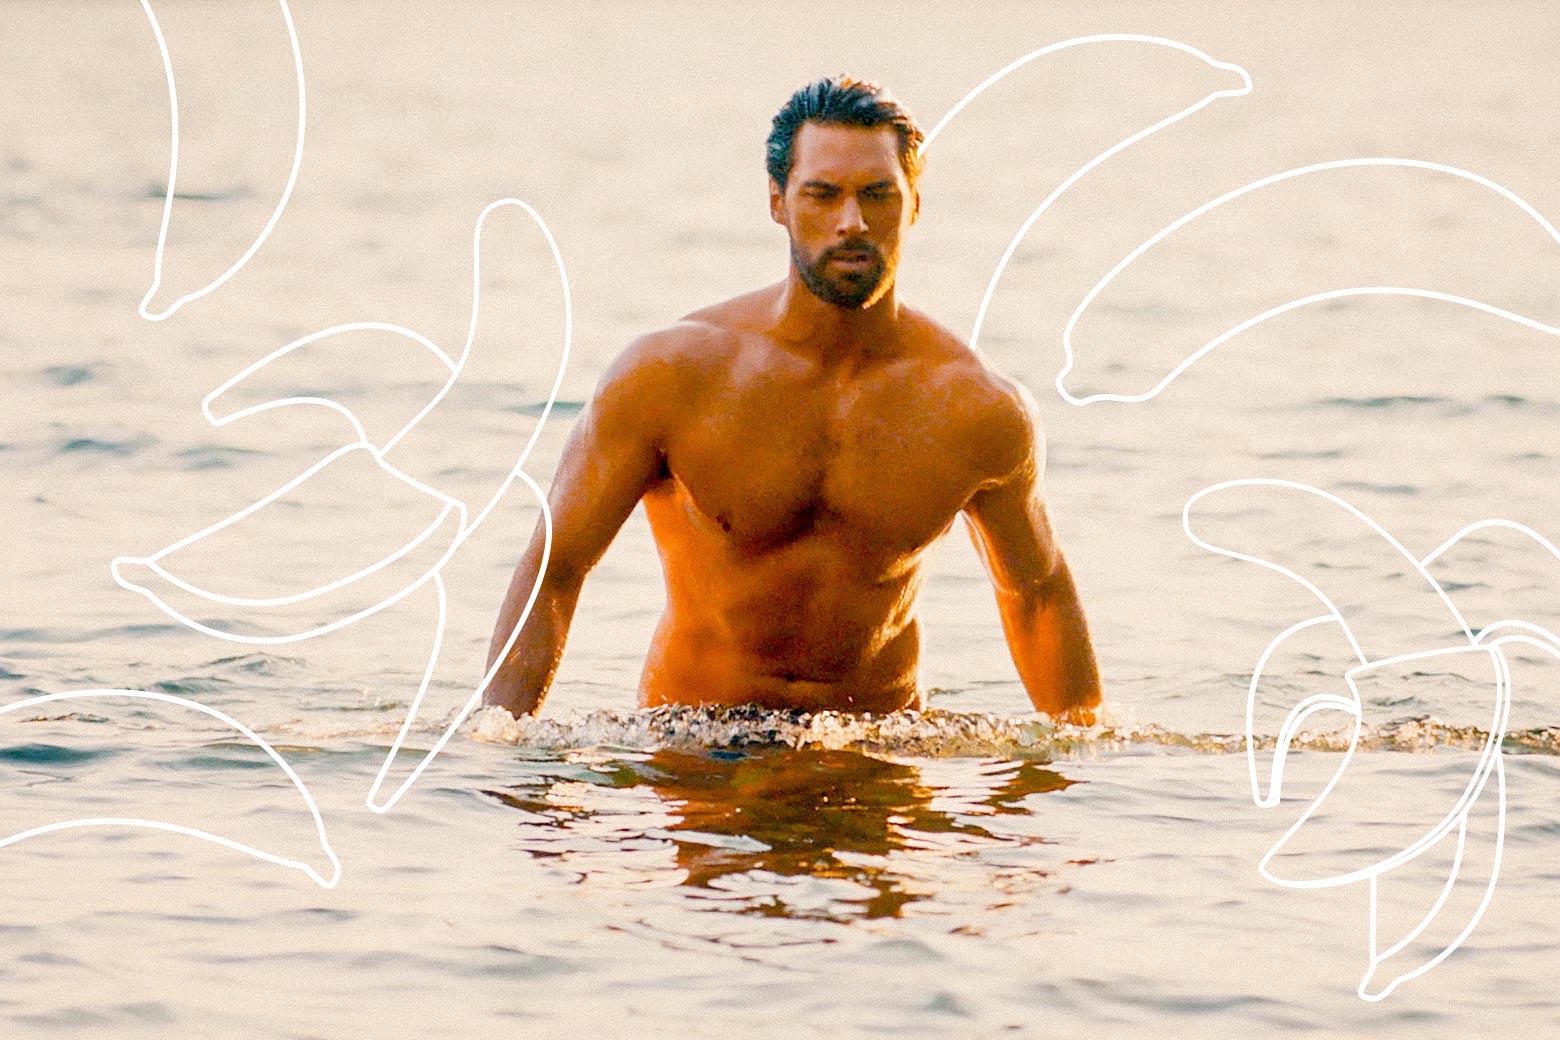 An extremely buff man rises out of the water. Over him are photoshopped a bunch of bananas.